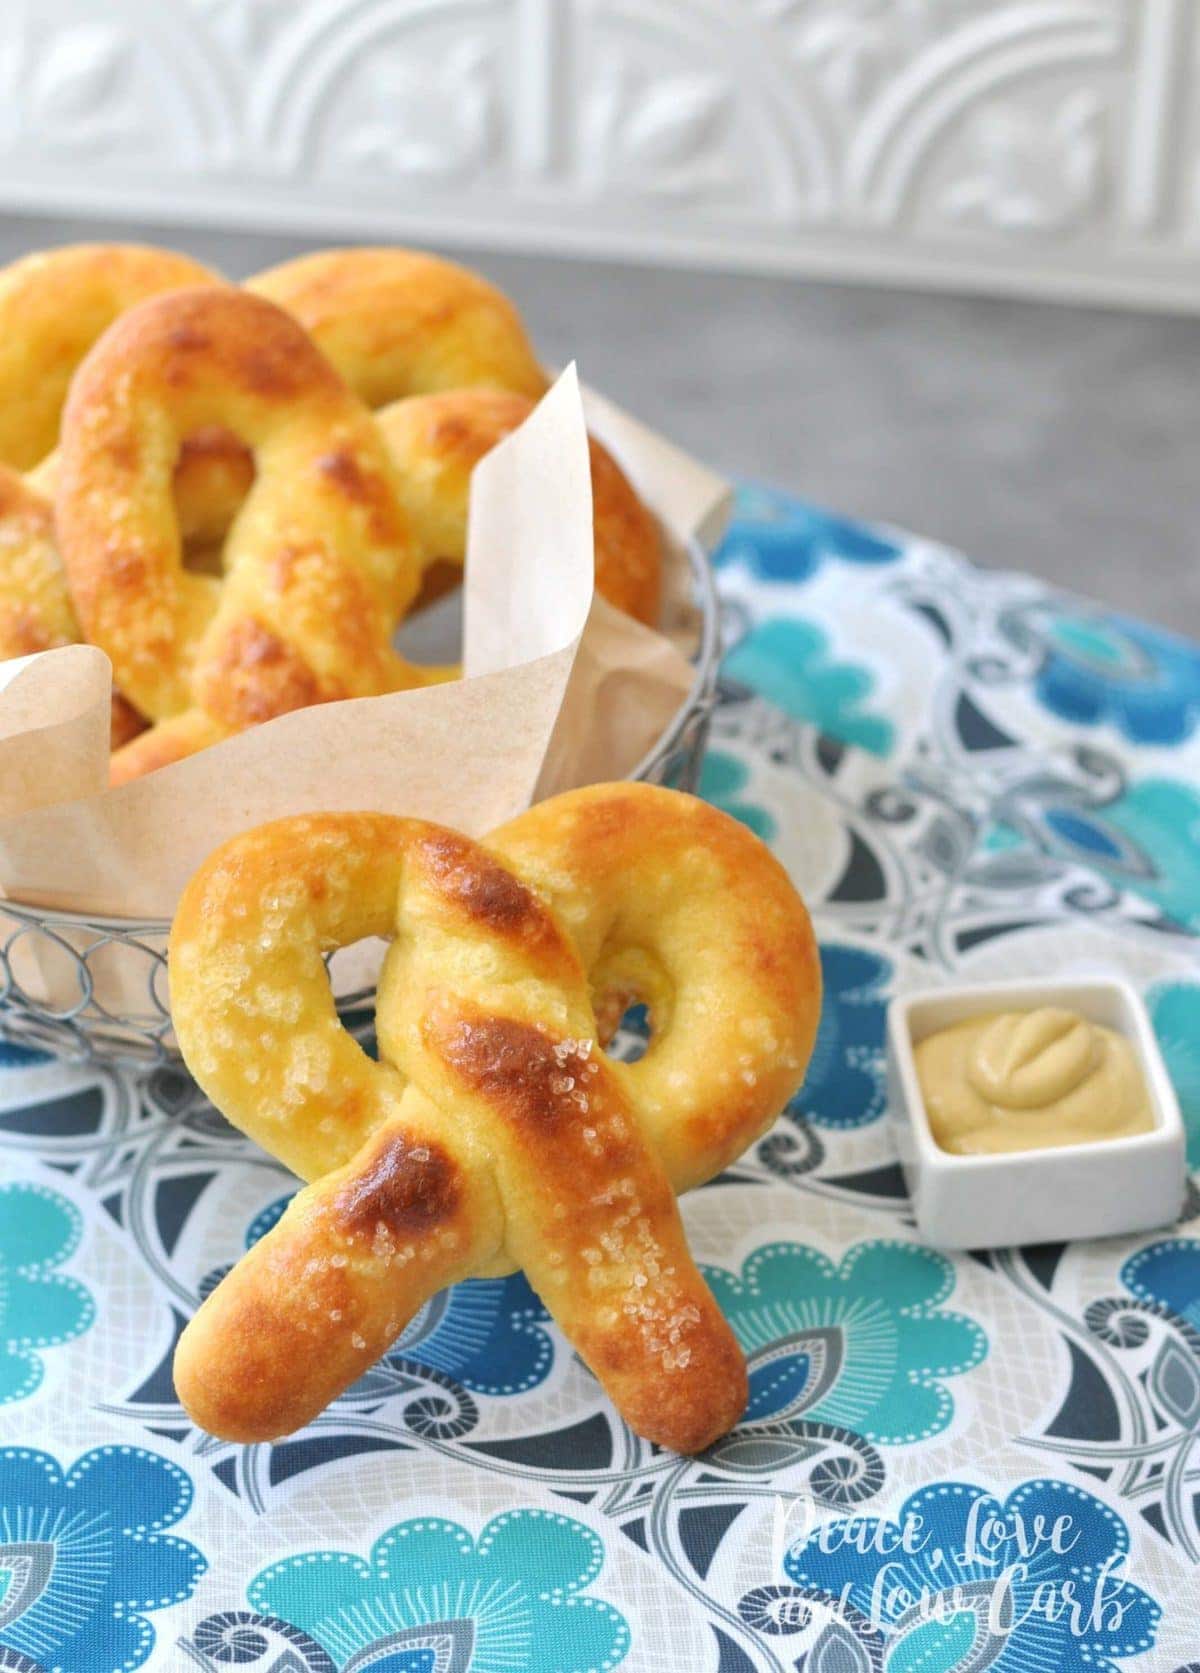 soft pretzels served in a wire basket and served with mustard fro sipping